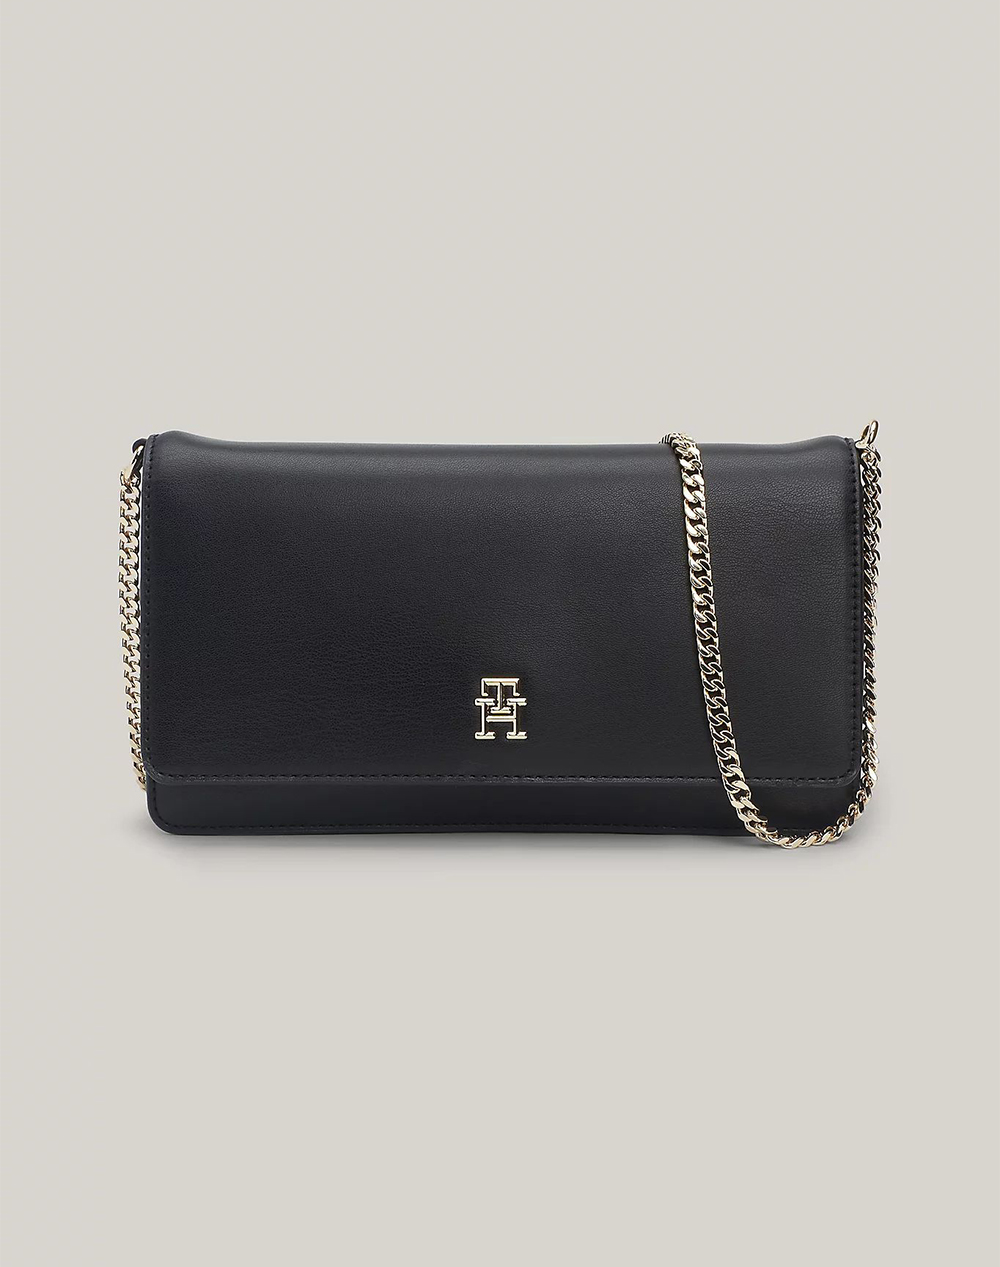 TOMMY HILFIGER TH REFINED CHAIN CROSSOVER (Διαστάσεις: 24 x 15 x 6.5 εκ) AW0AW16109-BDS Black